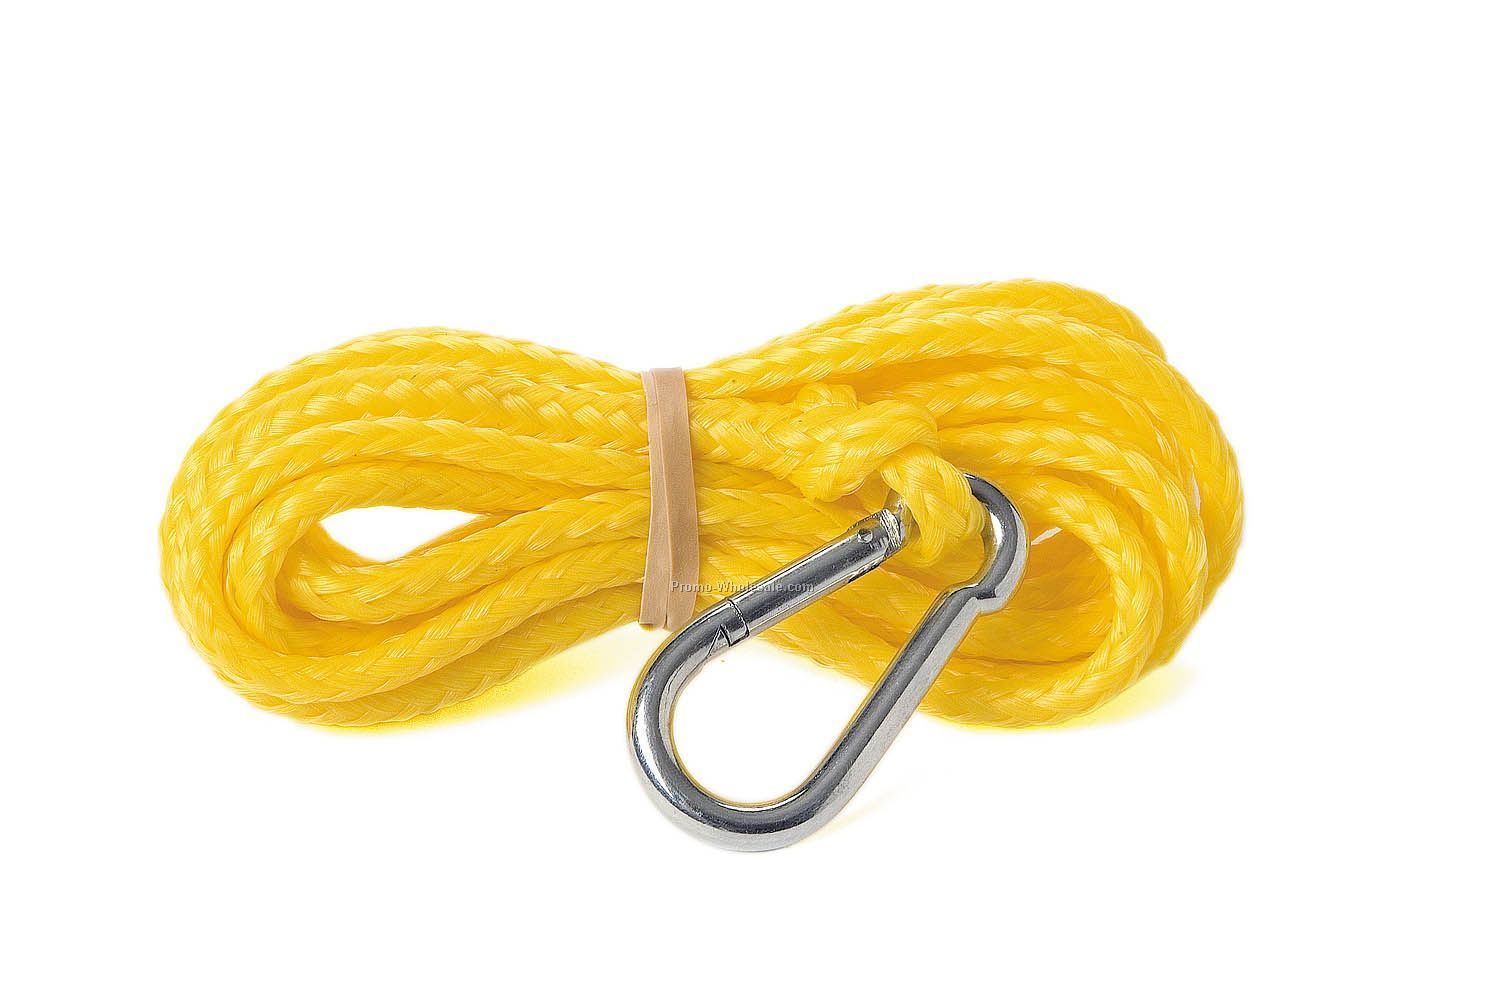 Rescue Rope (Blank)